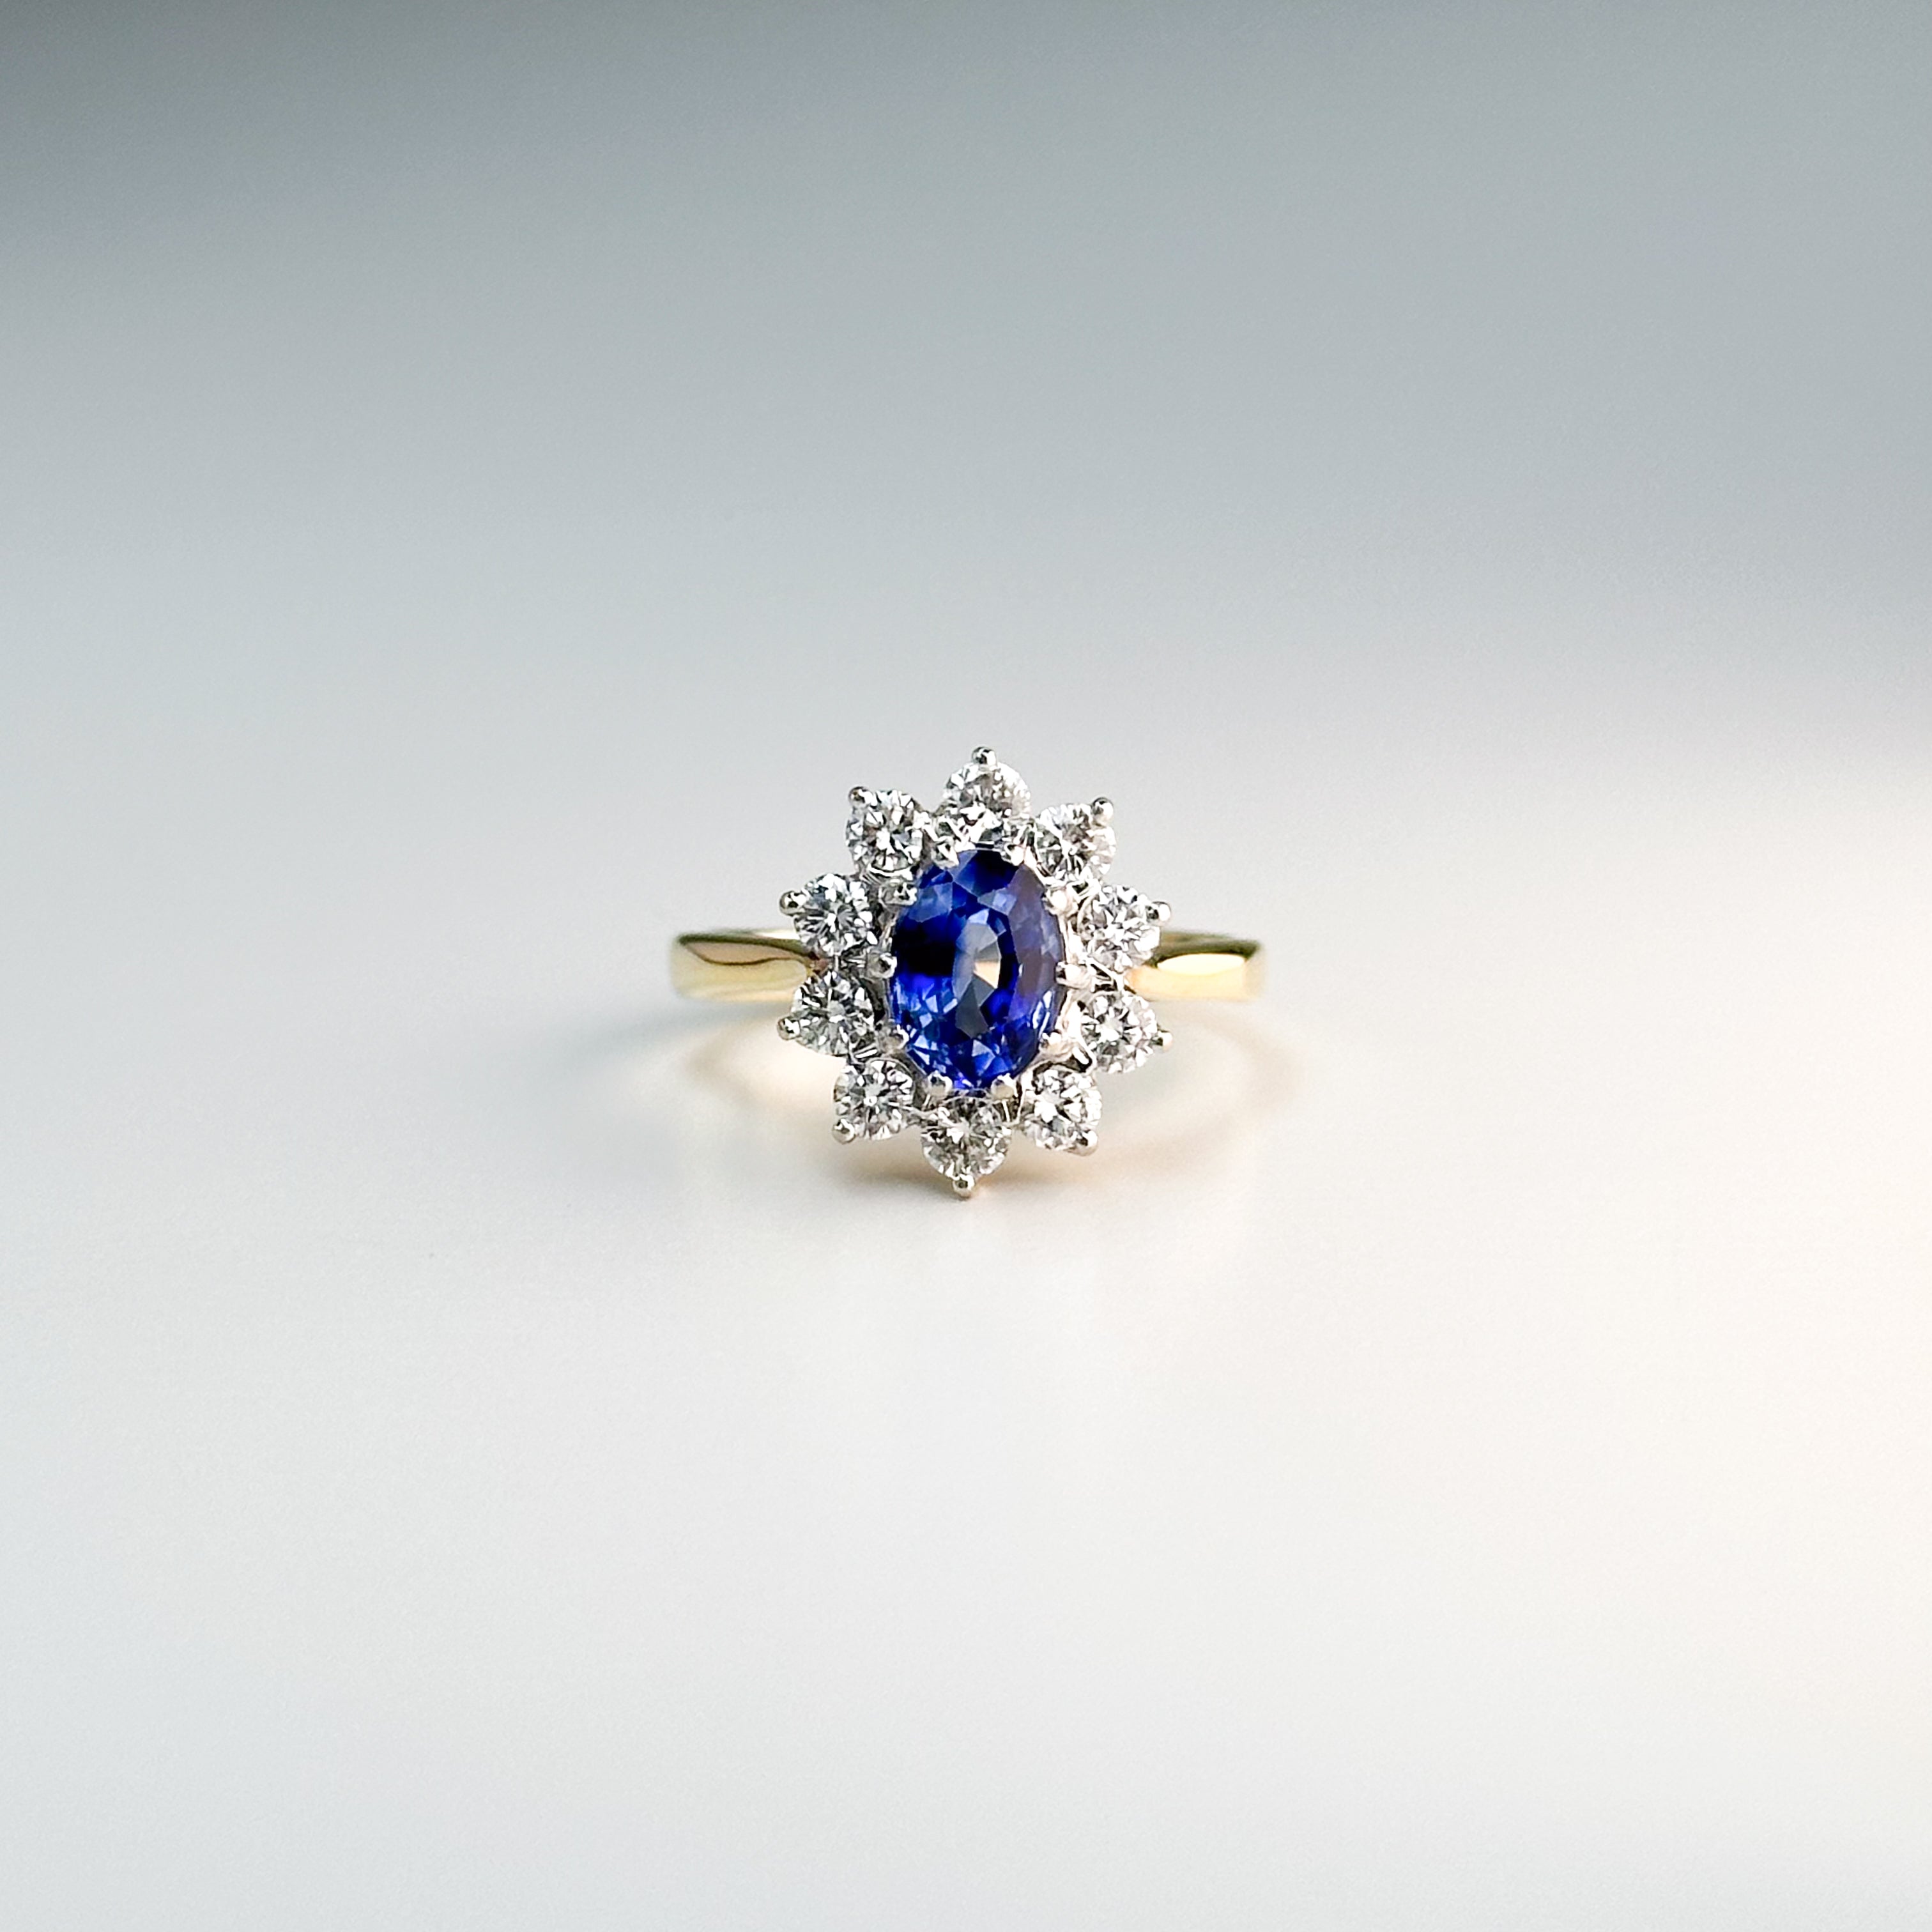 1.00ct Oval Cut Blue Sapphire Ring